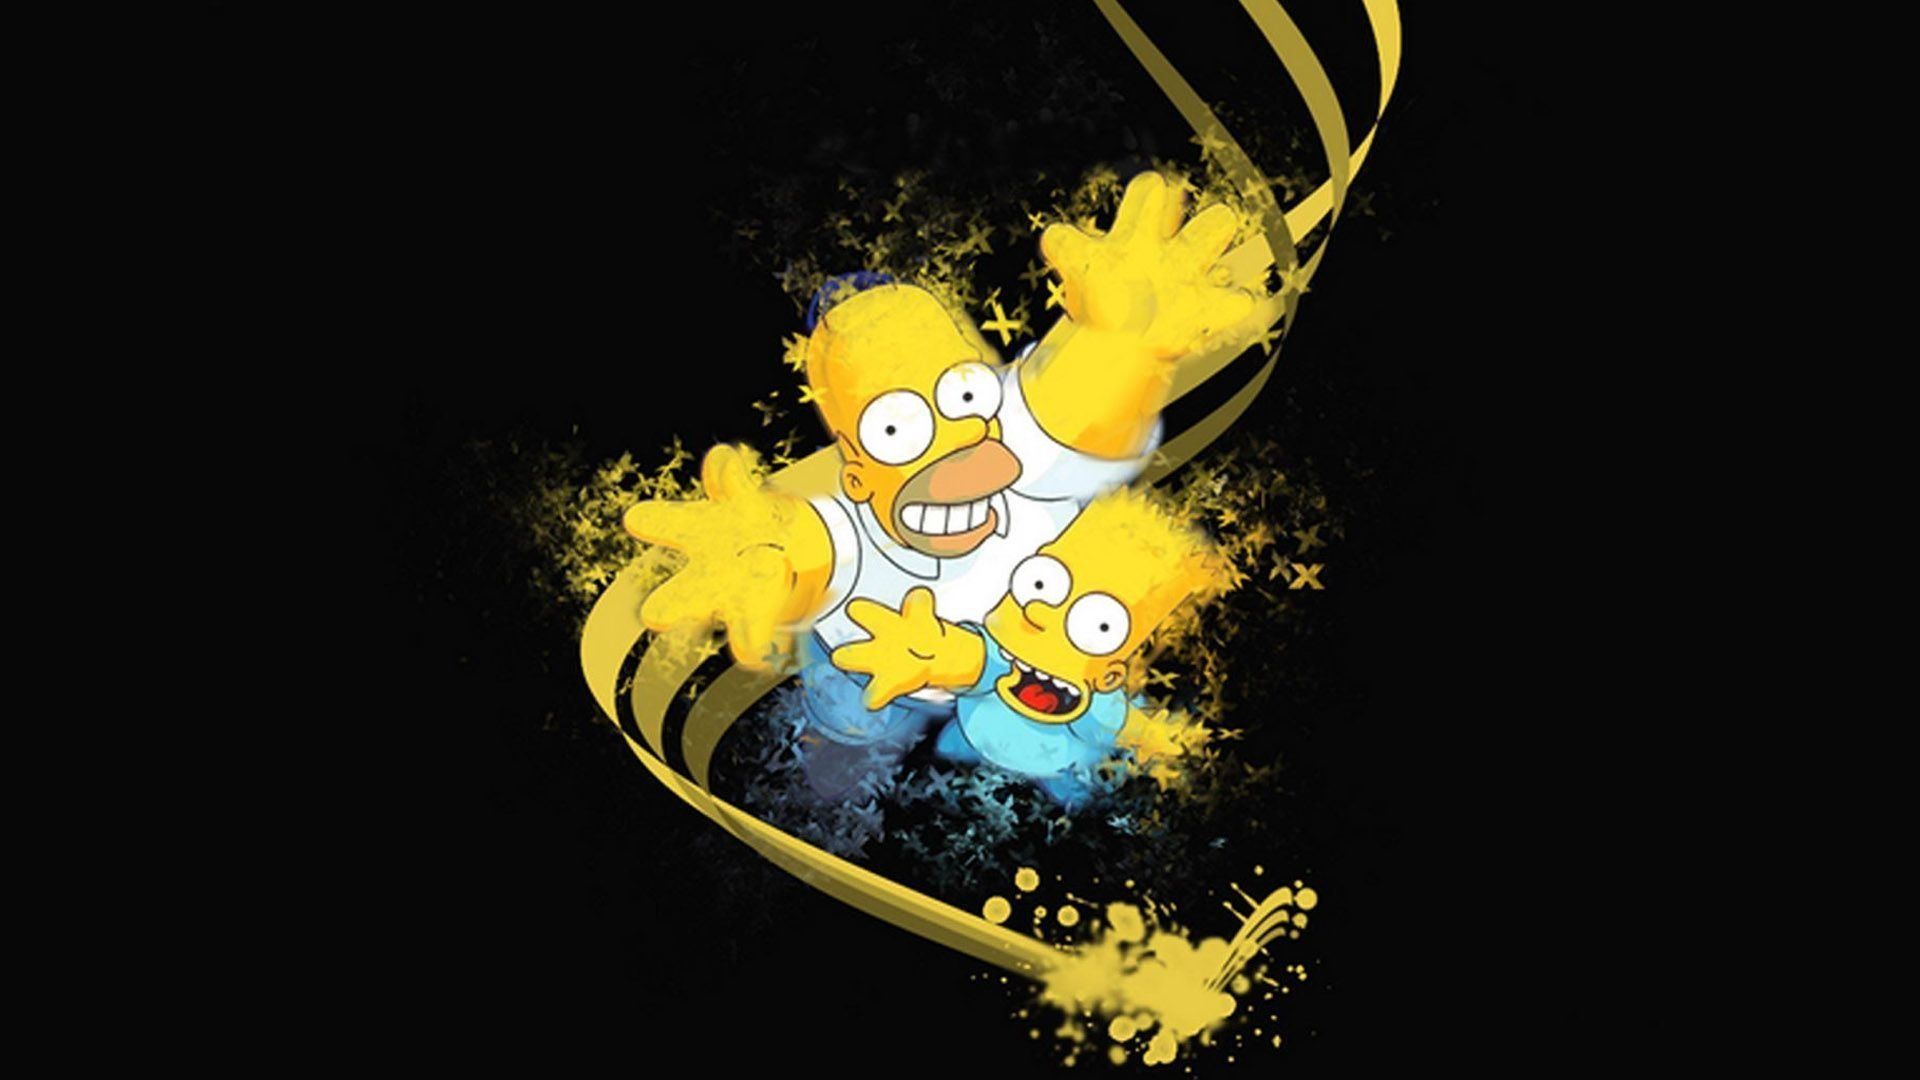 Trippy Bart Simpson Wallpapers